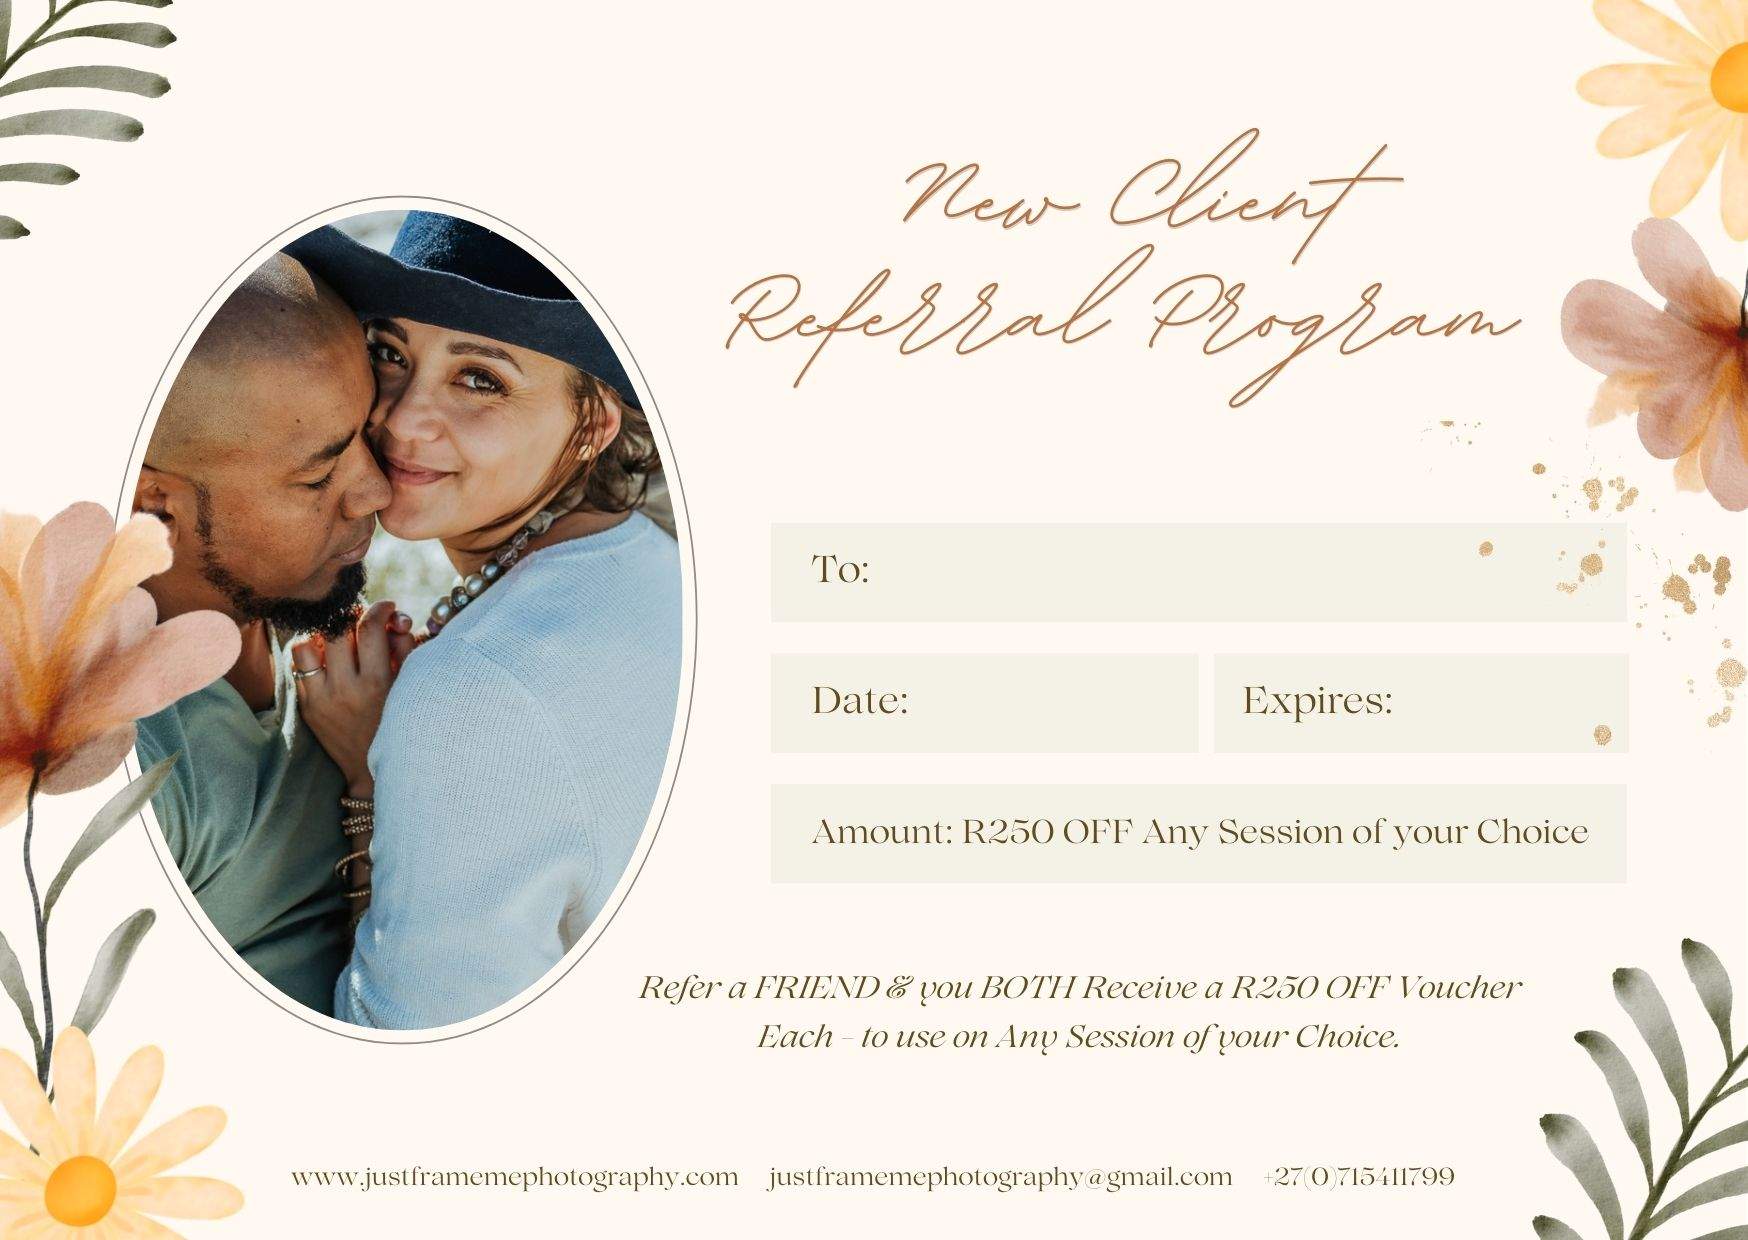 New Client Referral Program {Refer a Friend & BOTH of you will Receive a R250 OFF Voucher Each}